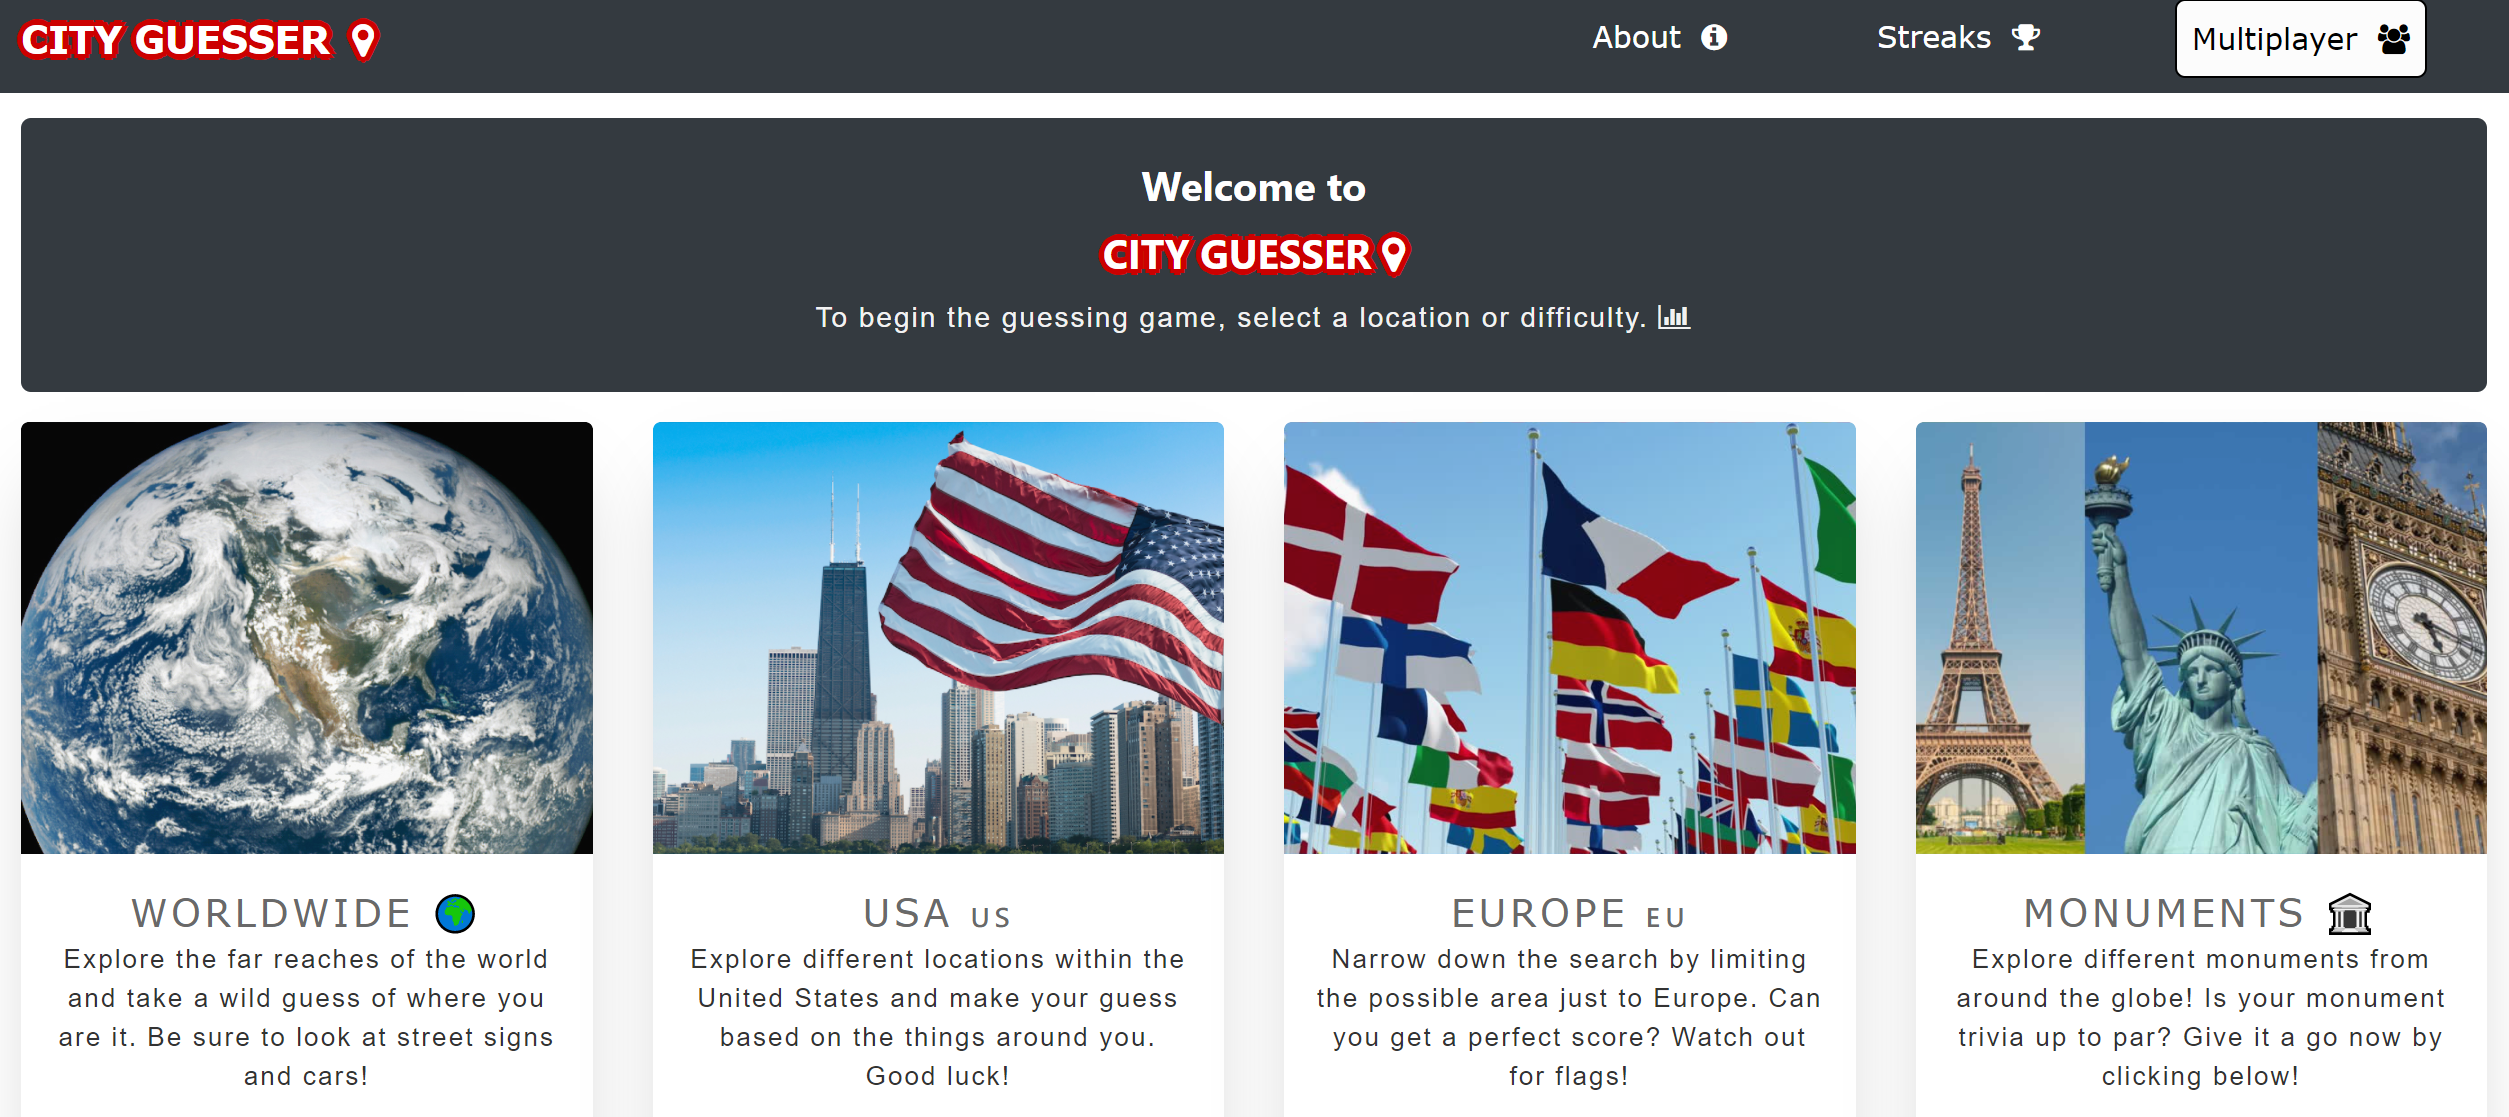 Free Technology for Guesser 2.0 - Guess City from Video Clips